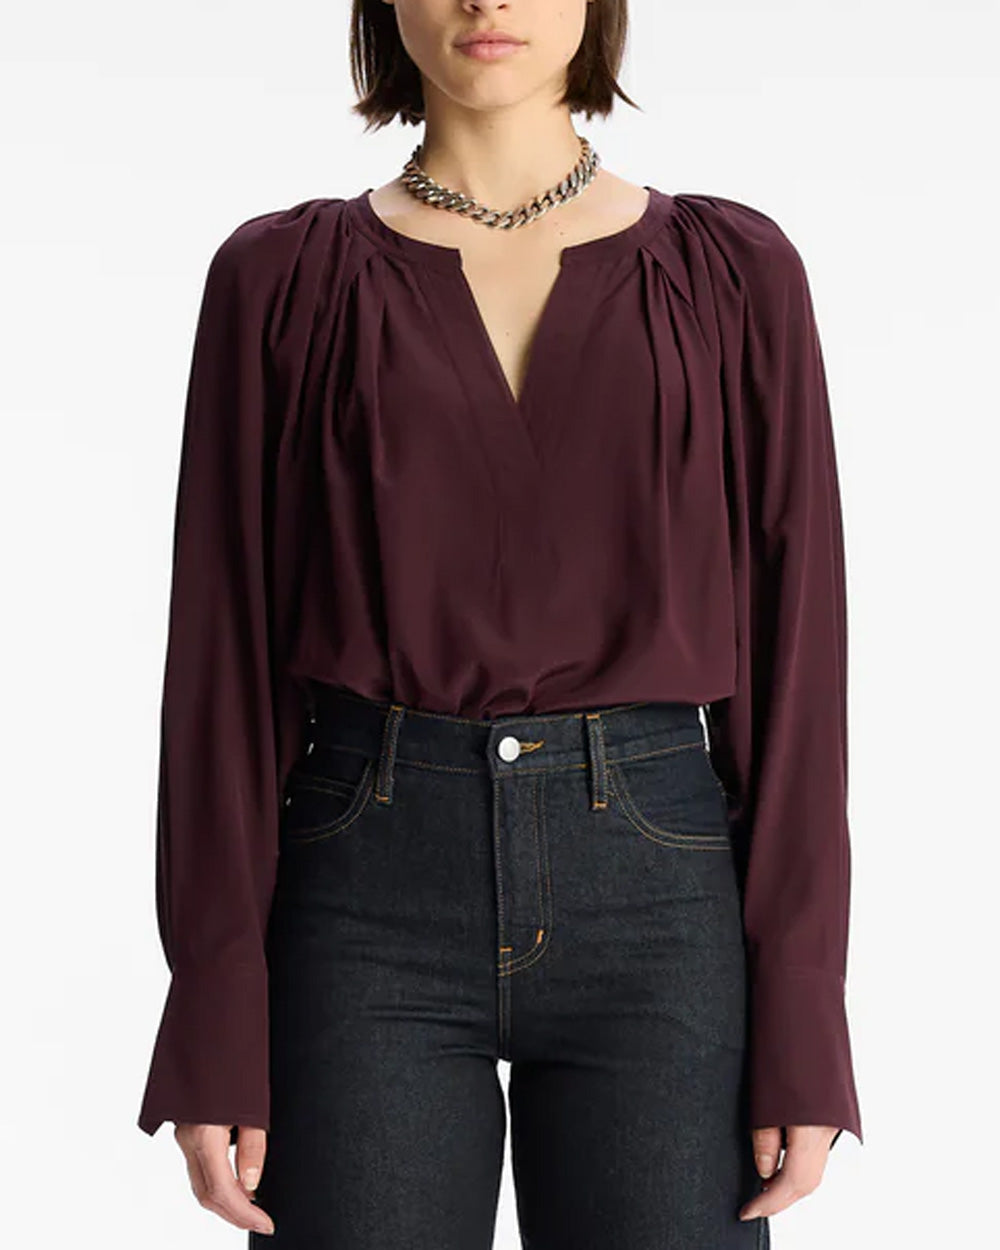 Chicory Nomad Top